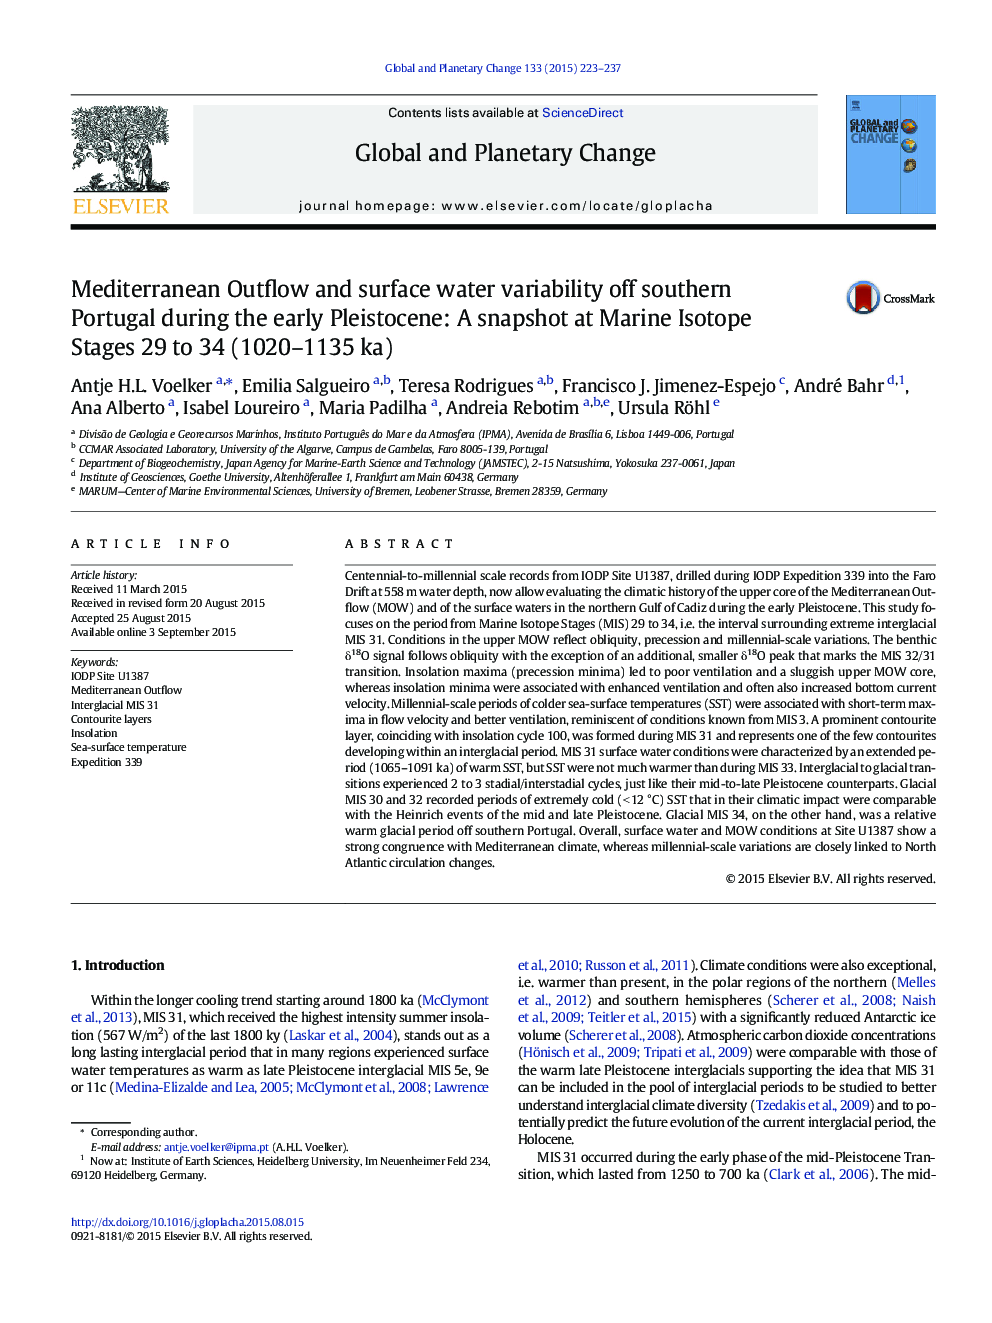 Mediterranean Outflow and surface water variability off southern Portugal during the early Pleistocene: A snapshot at Marine Isotope Stages 29 to 34 (1020-1135Â ka)